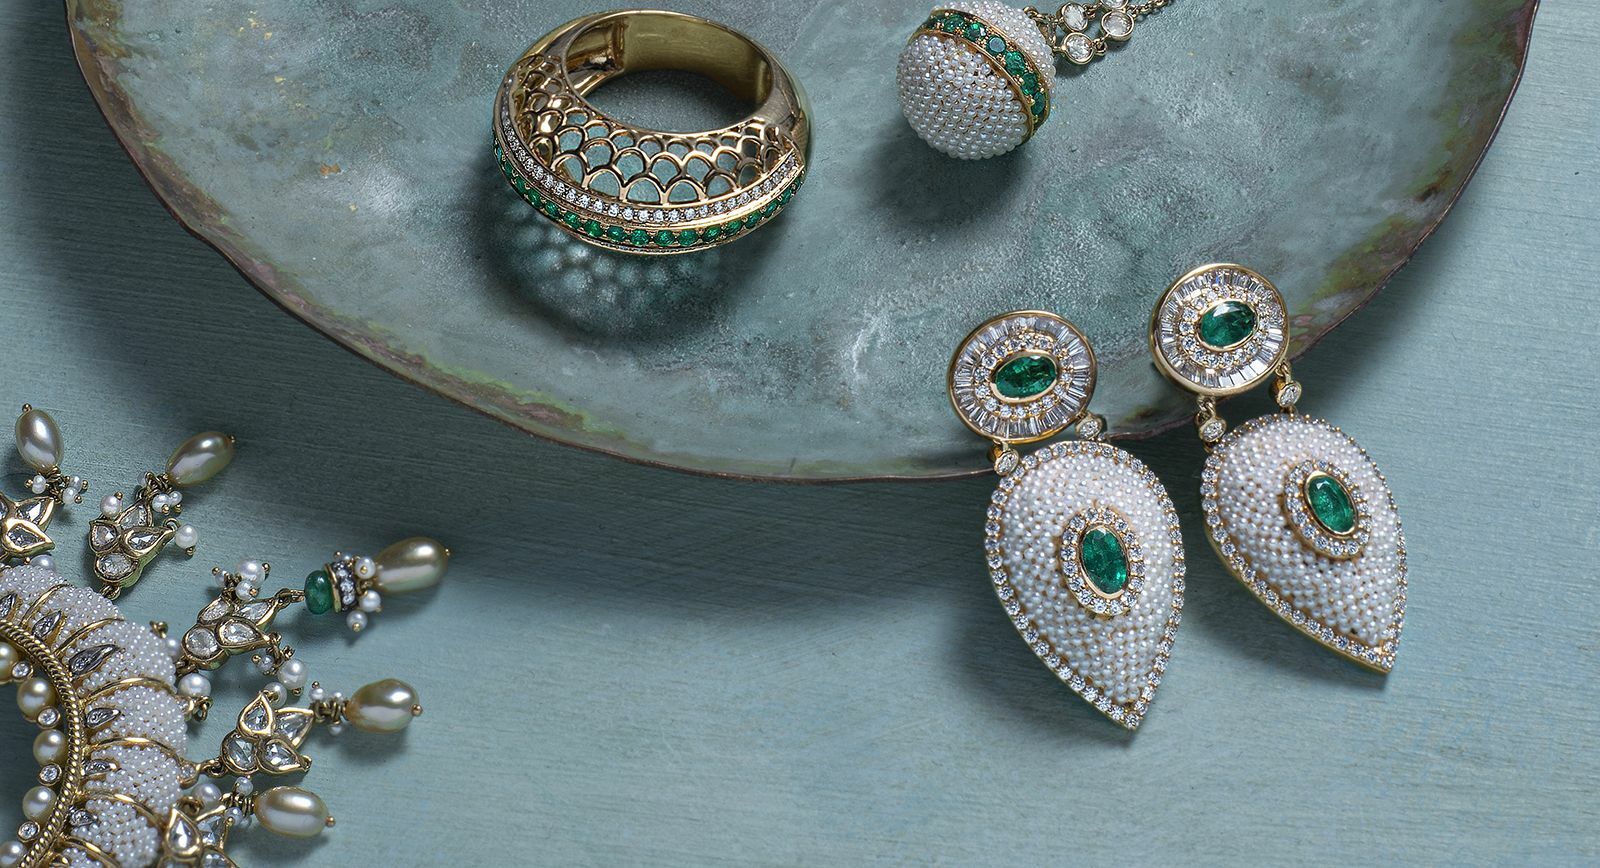 Moksh jewellery is inspired by the splendours of Mughal India